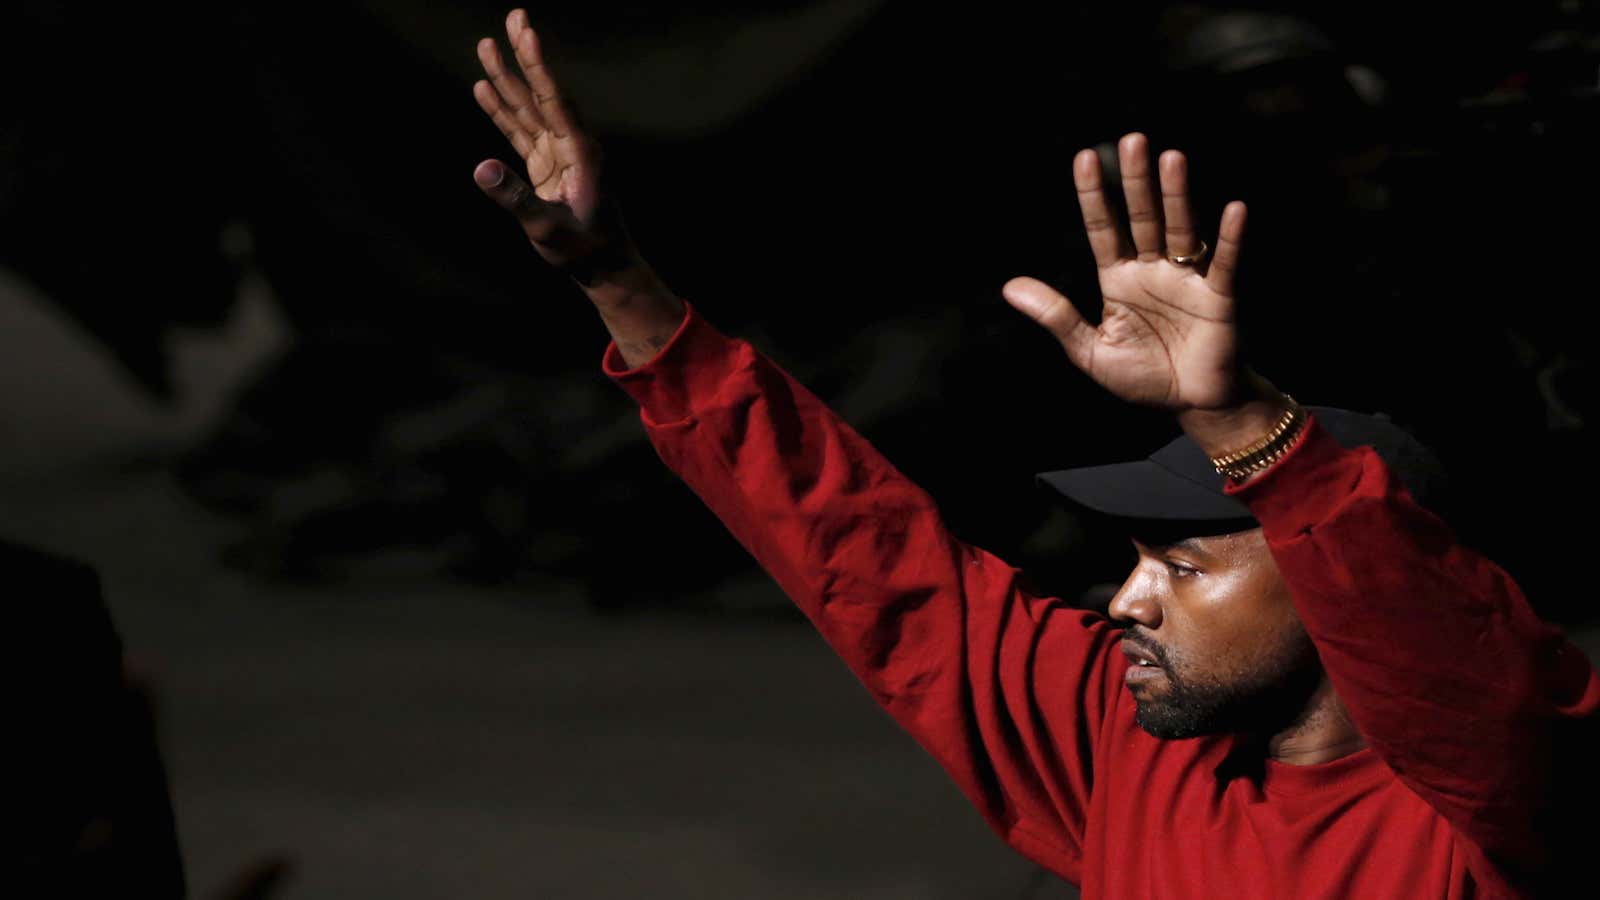 Kanye West’s newest album, The Life of Pablo, is a big success on Apple Music.